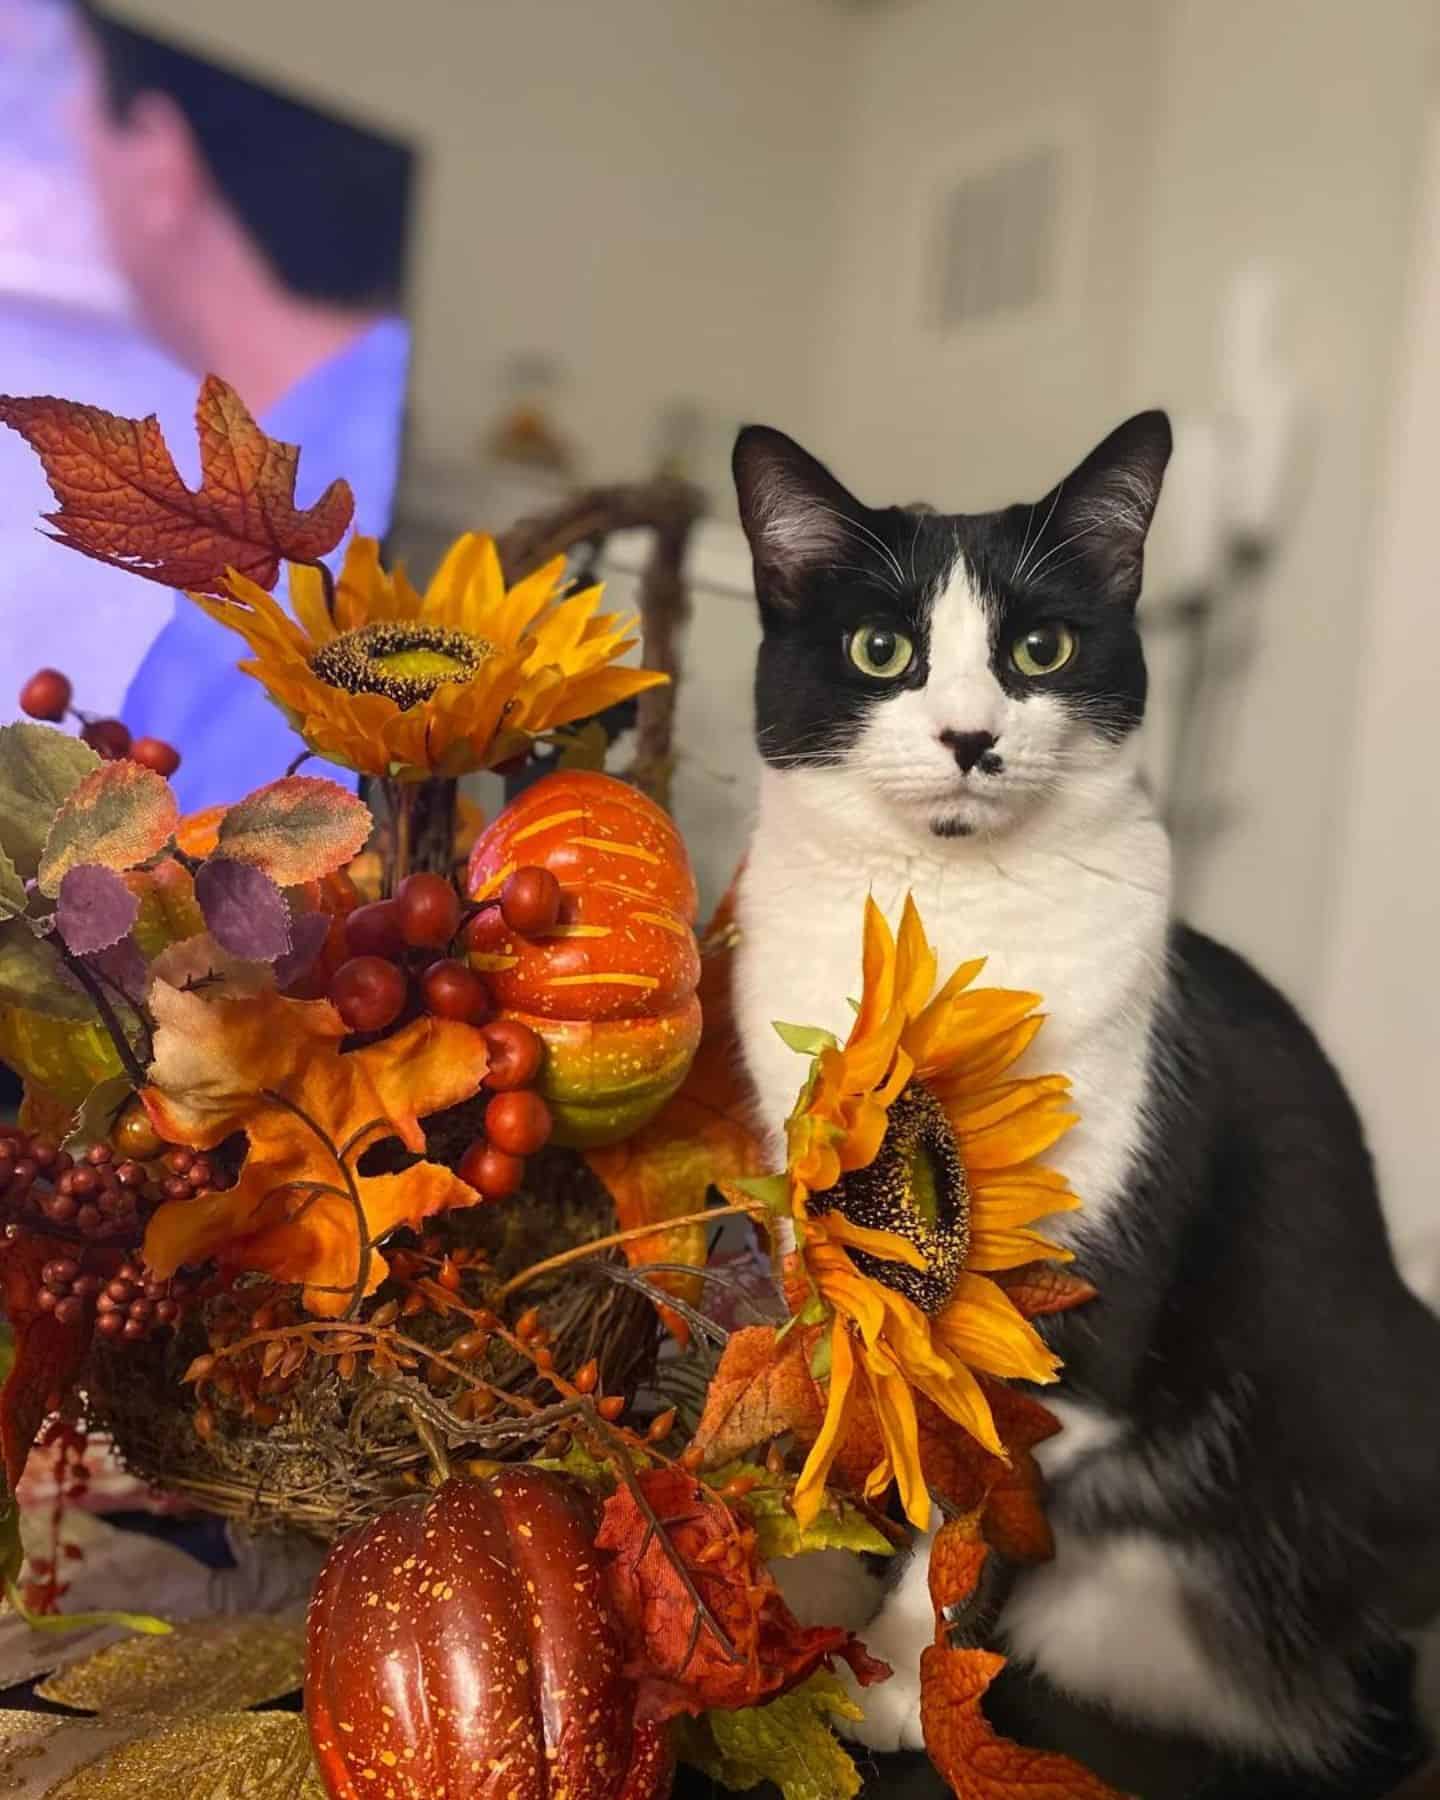 the cat is posing next to the flowers